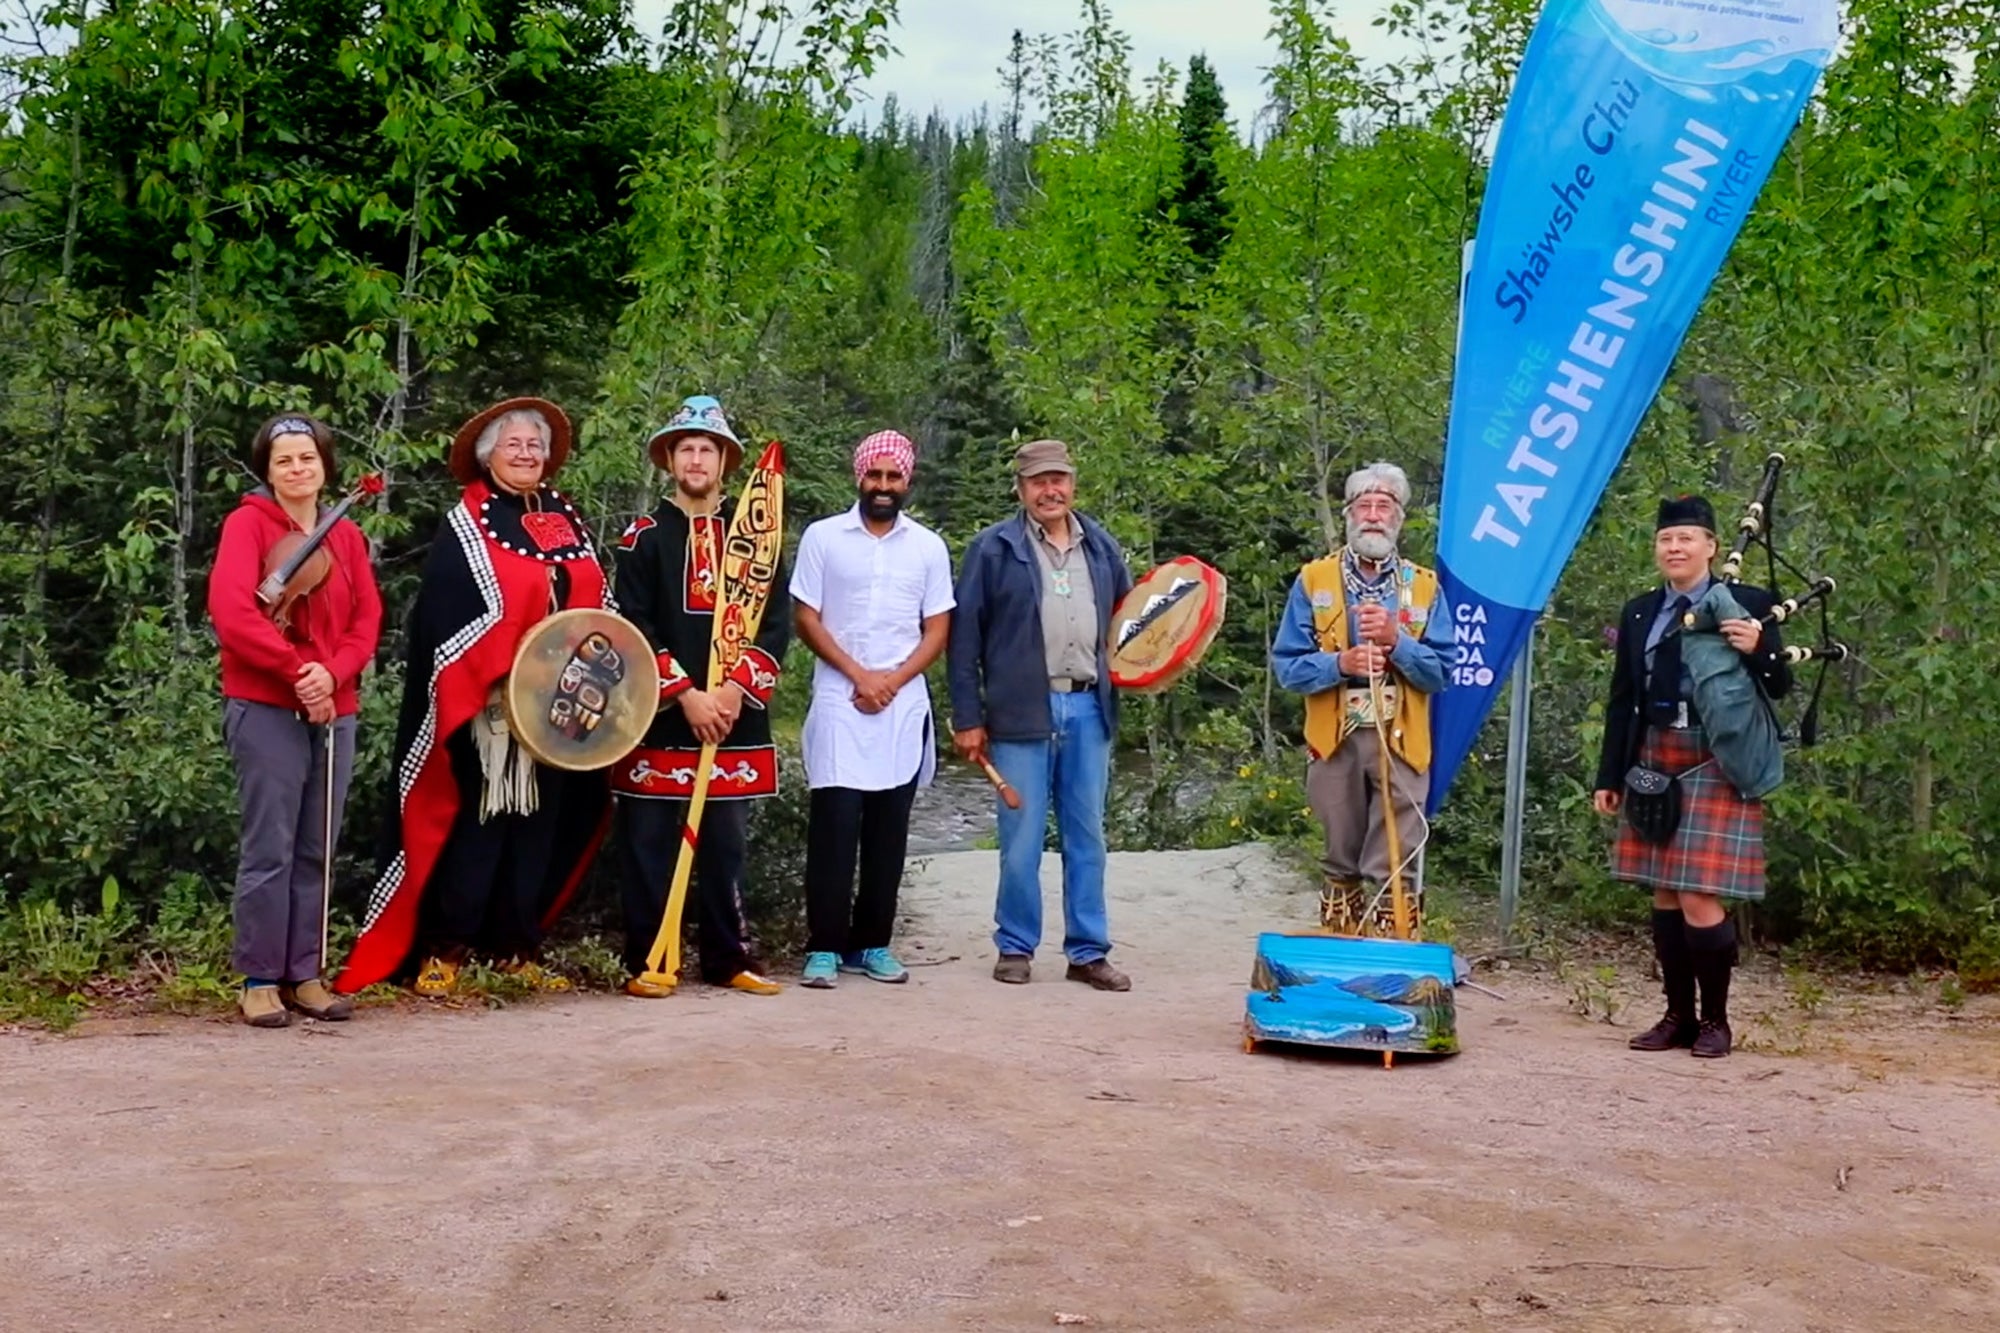 This photo was taken at Million-Dollar Falls (on the bank of Tatshenshini River) near the Yukon-Alaska border in 2017. The event was hosted by "Yukon Women in Music". The event was part of the Canadian Heritage Rivers Celebration. People from various cultures and communities came together to dance Bhangra there.